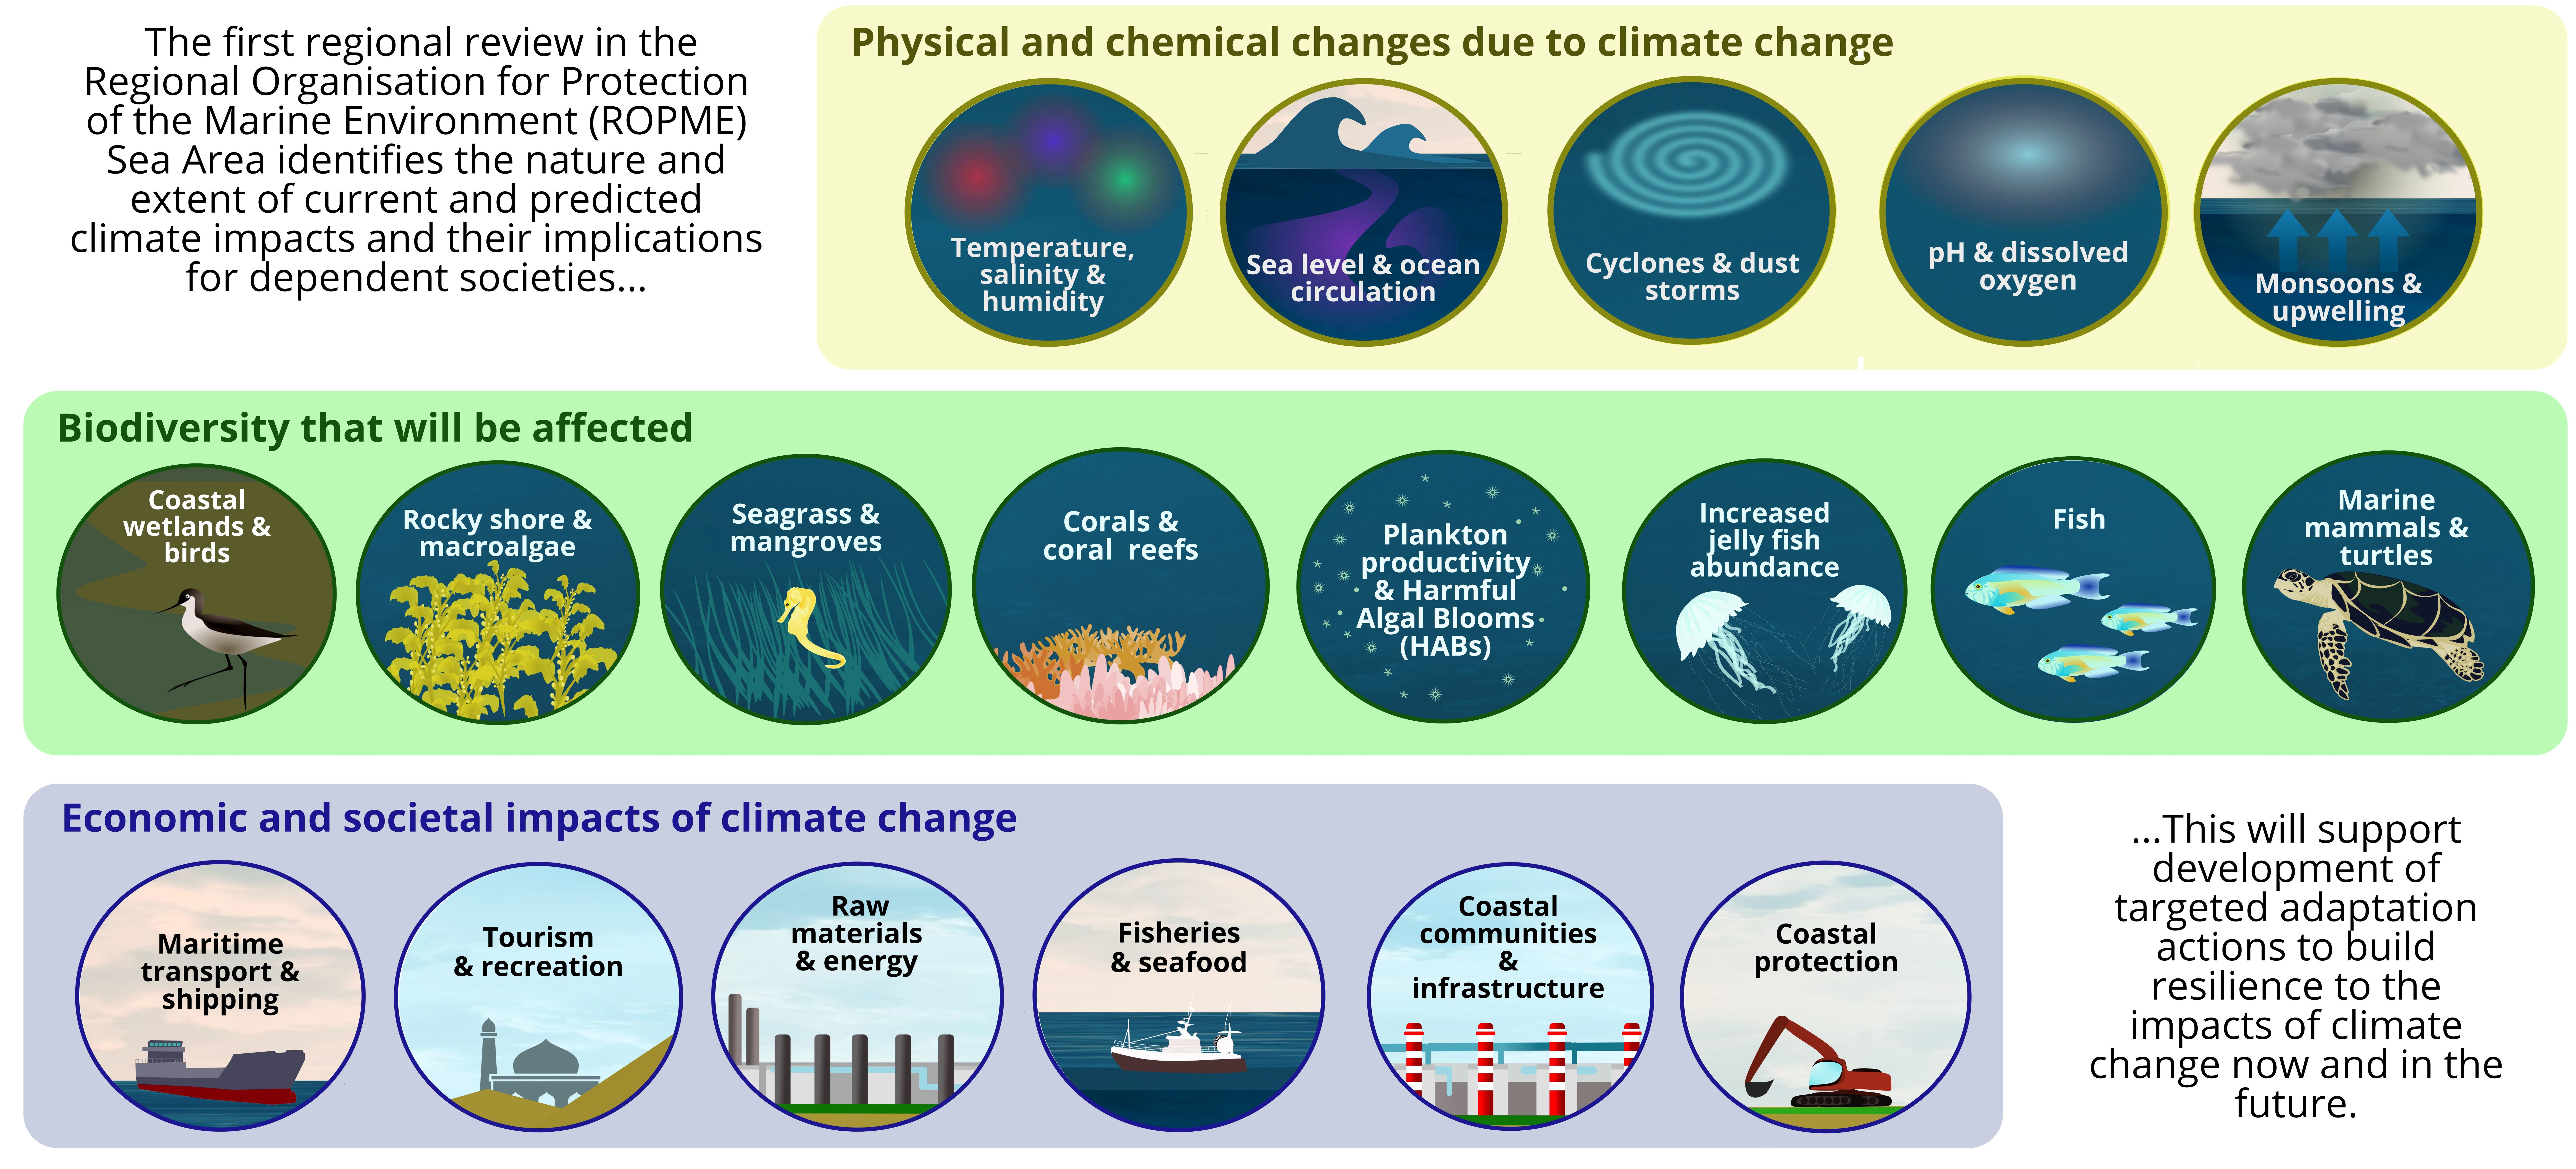 Sustainability Free Full-Text A Regional Review of Marine and Coastal Impacts of Climate Change on the ROPME Sea Area